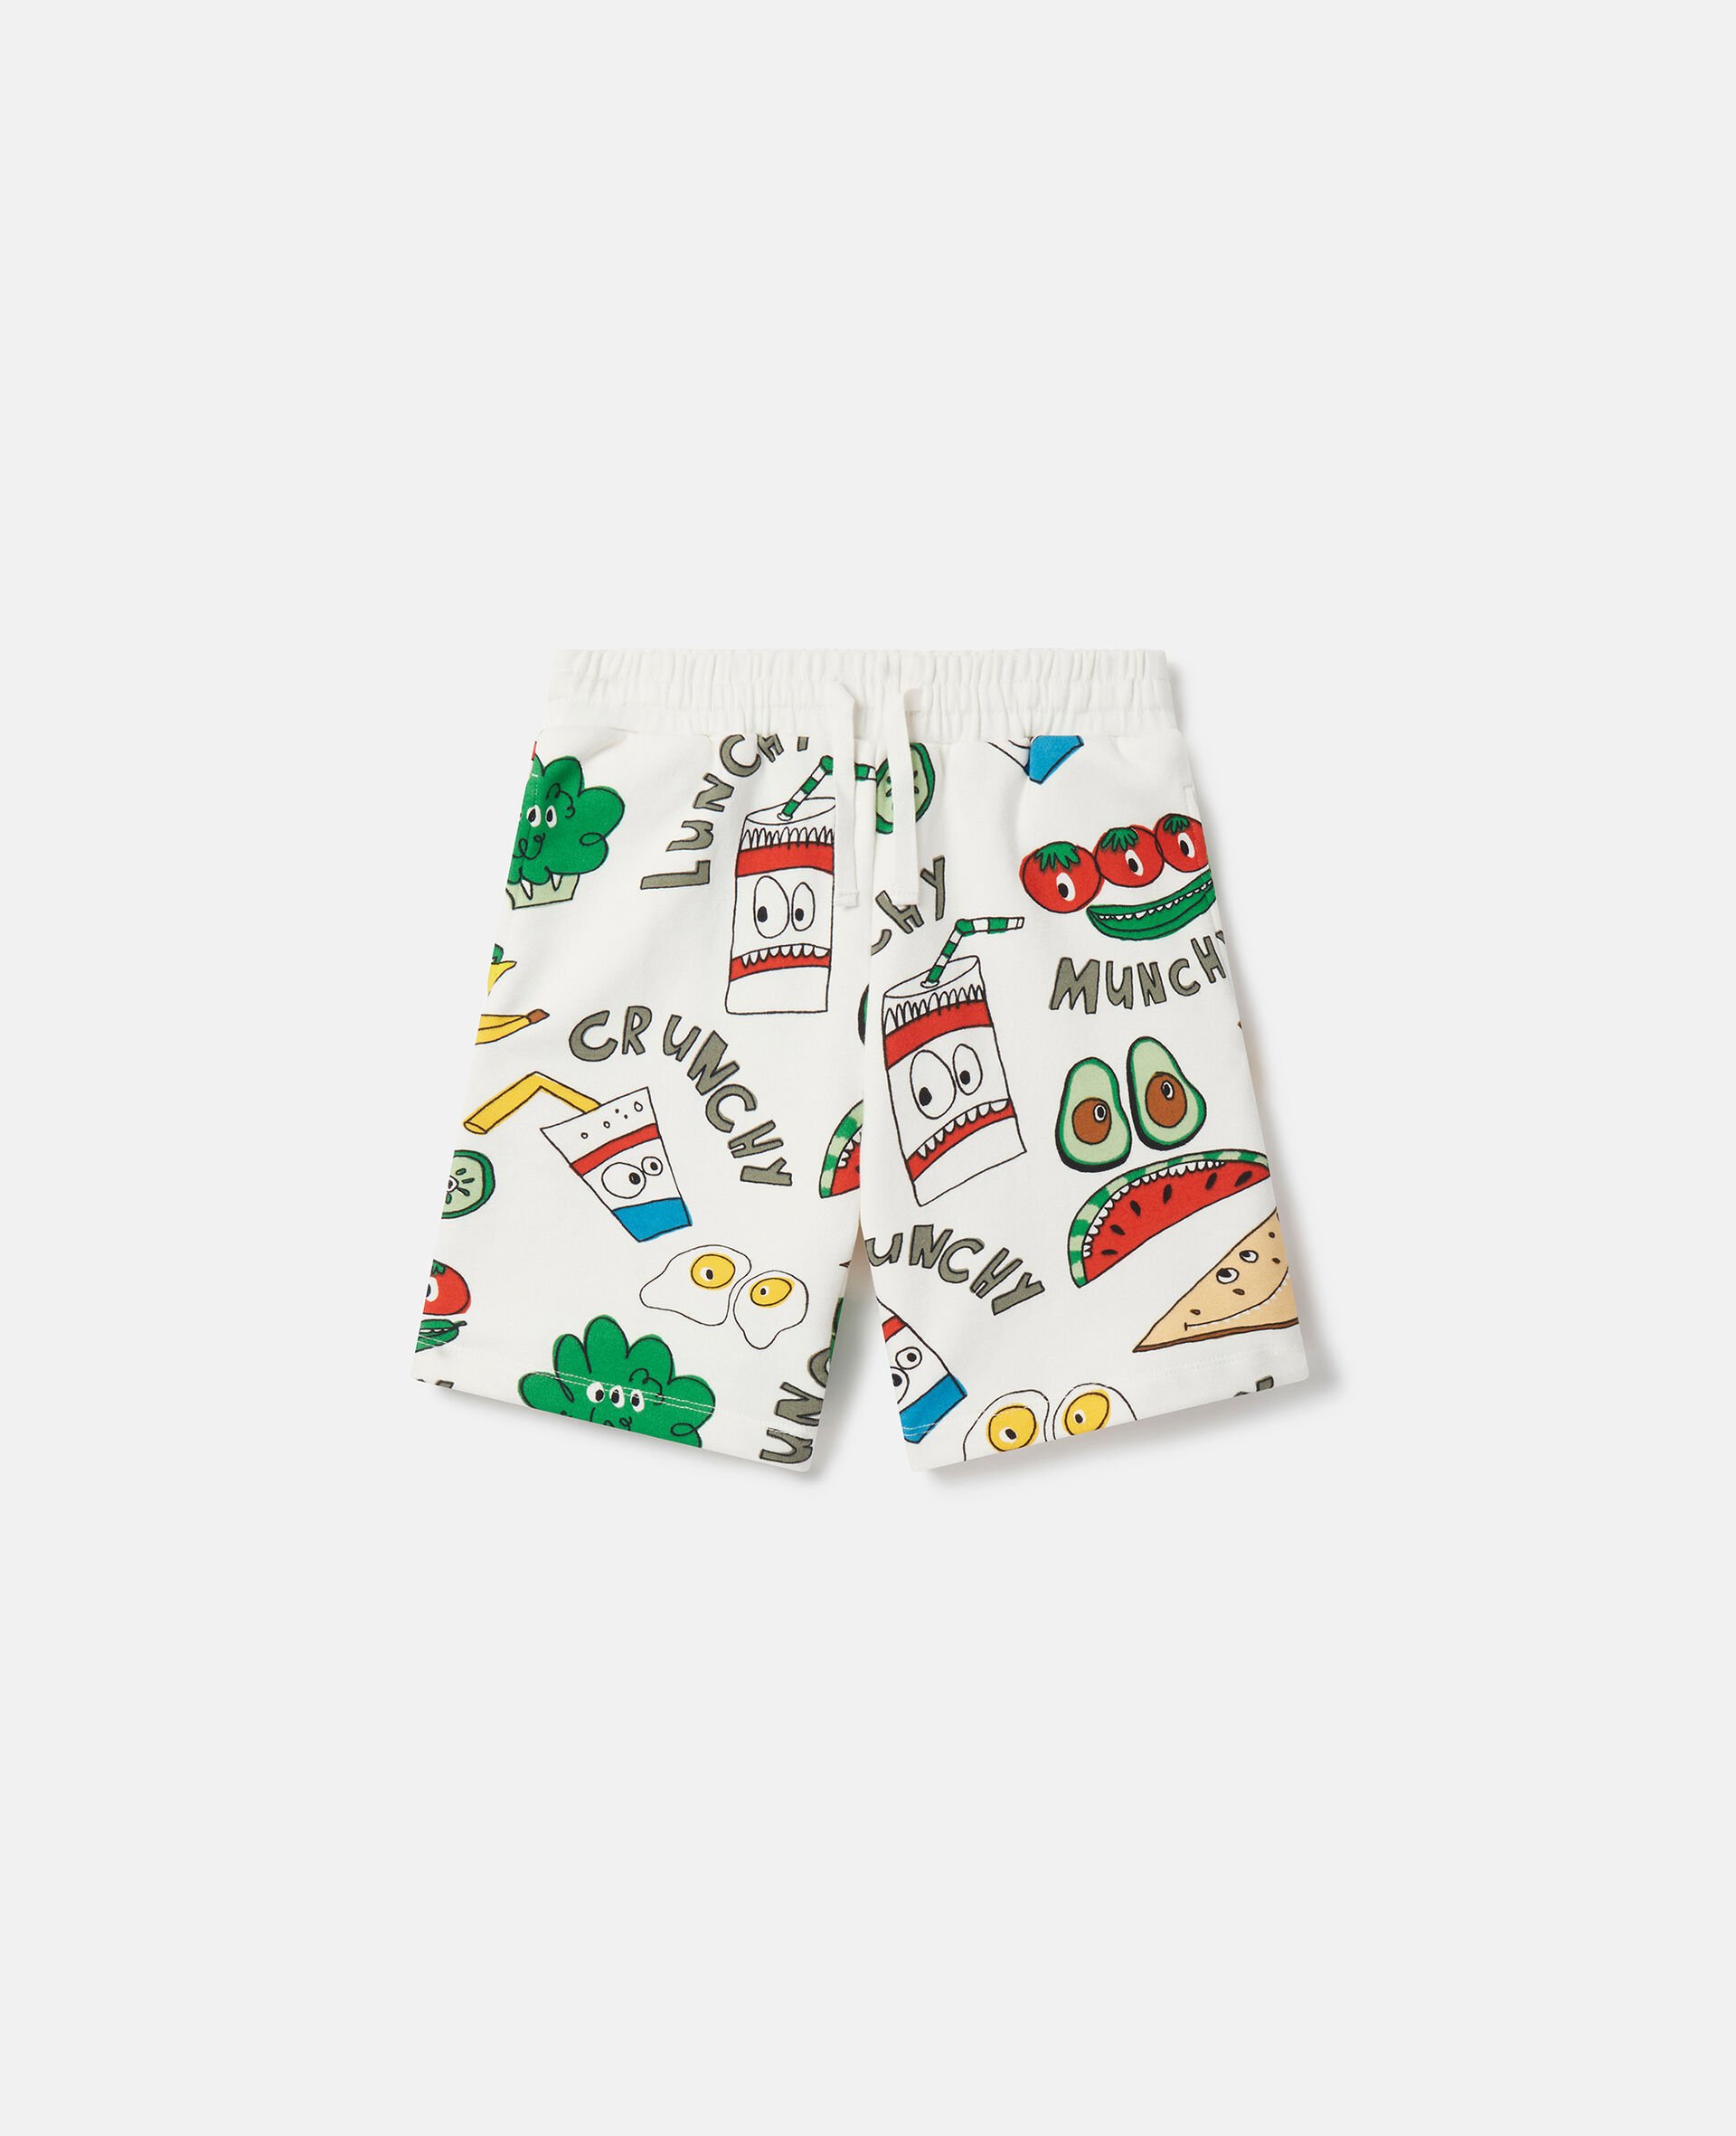 Crunchy Lunchy Print Shorts-Multicolour-large image number 0